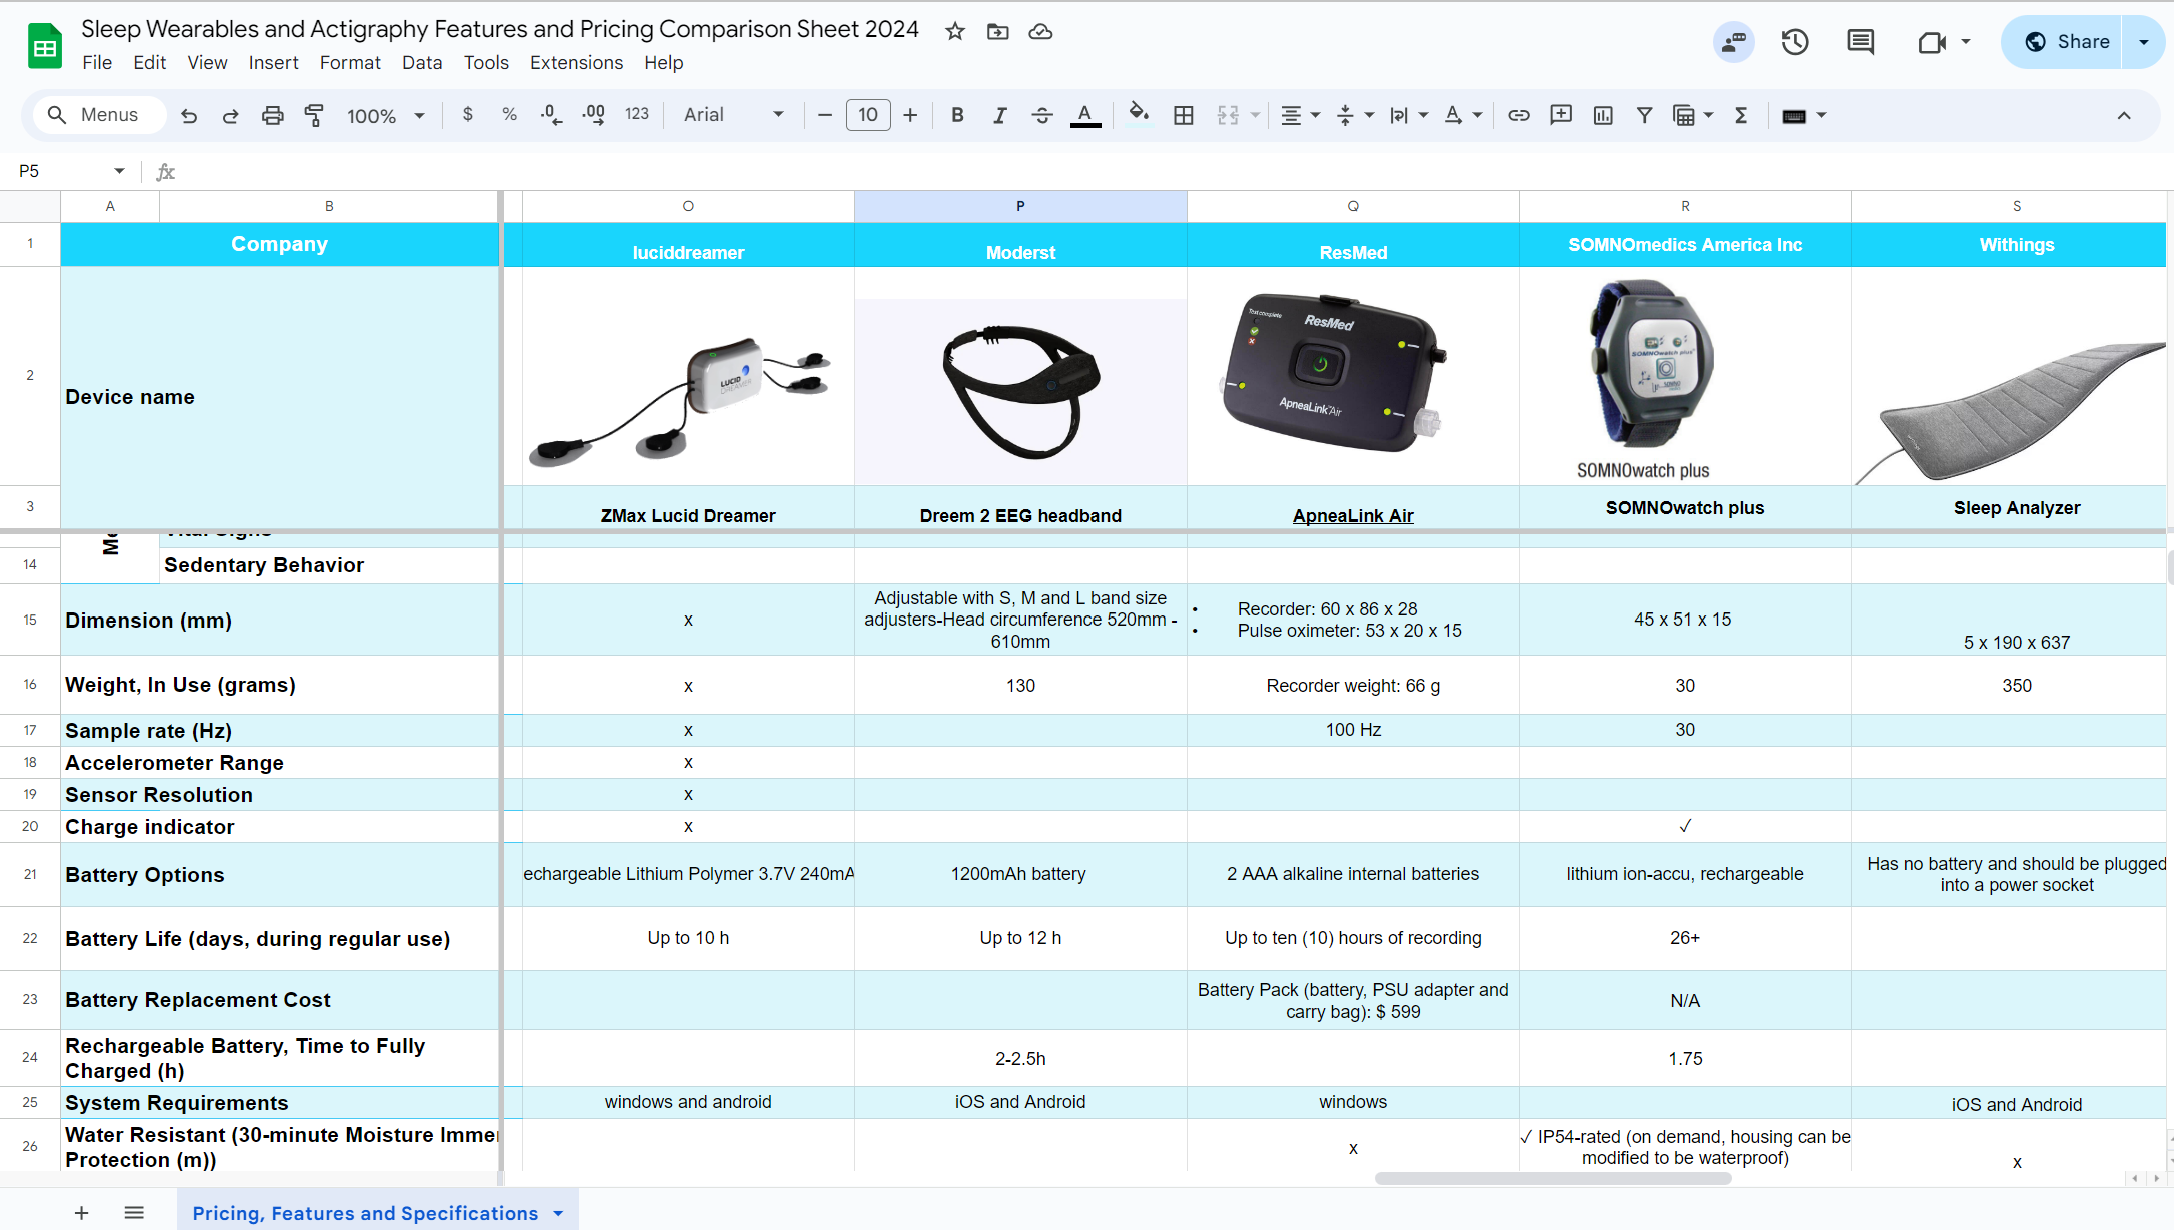 Screenshot of a comparison sheet comparing sleep and activity trackers, detailing company names, device models, and various features like sensor resolution, accelerometer comparison, and battery life.